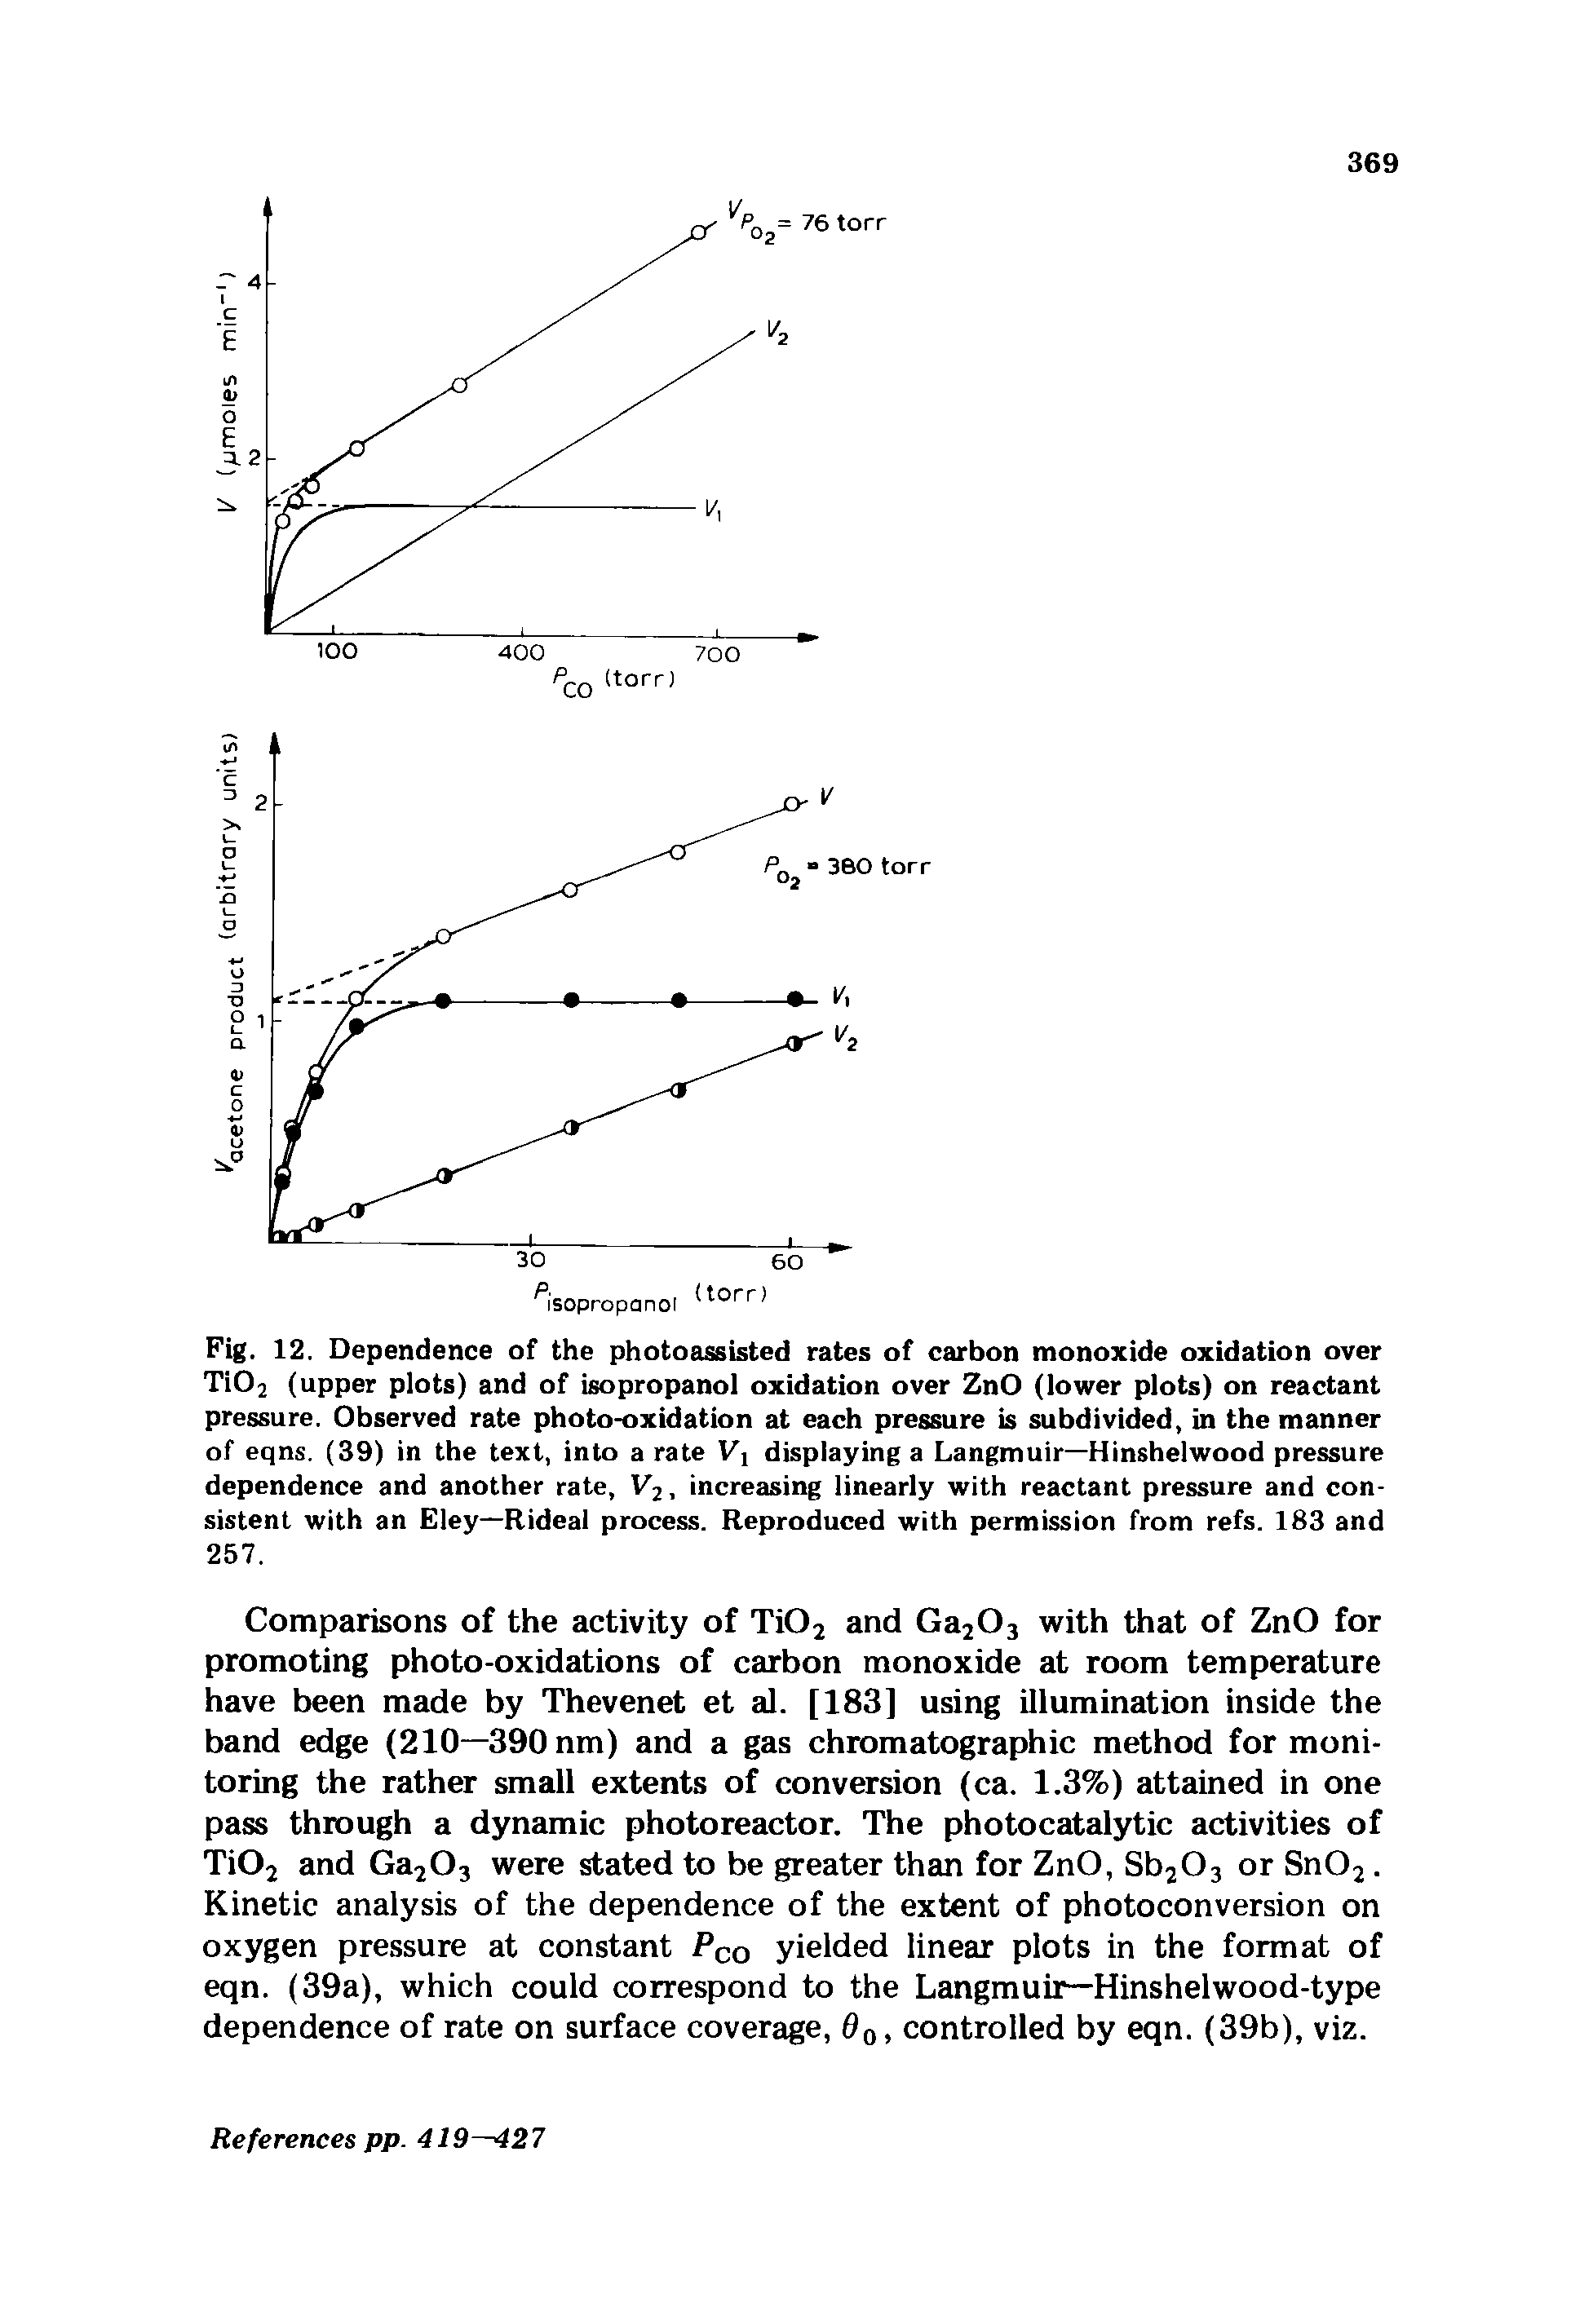 Fig. 12. Dependence of the photoassisted rates of carbon monoxide oxidation over Ti02 (upper plots) and of isopropanol oxidation over ZnO (lower plots) on reactant pressure. Observed rate photo-oxidation at each pressure is subdivided, in the manner of eqns. (39) in the text, into a rate Vx displaying a Langmuir—Hinshelwood pressure dependence and another rate, V2, increasing linearly with reactant pressure and consistent with an Eley—Rideal process. Reproduced with permission from refs. 183 and 257.